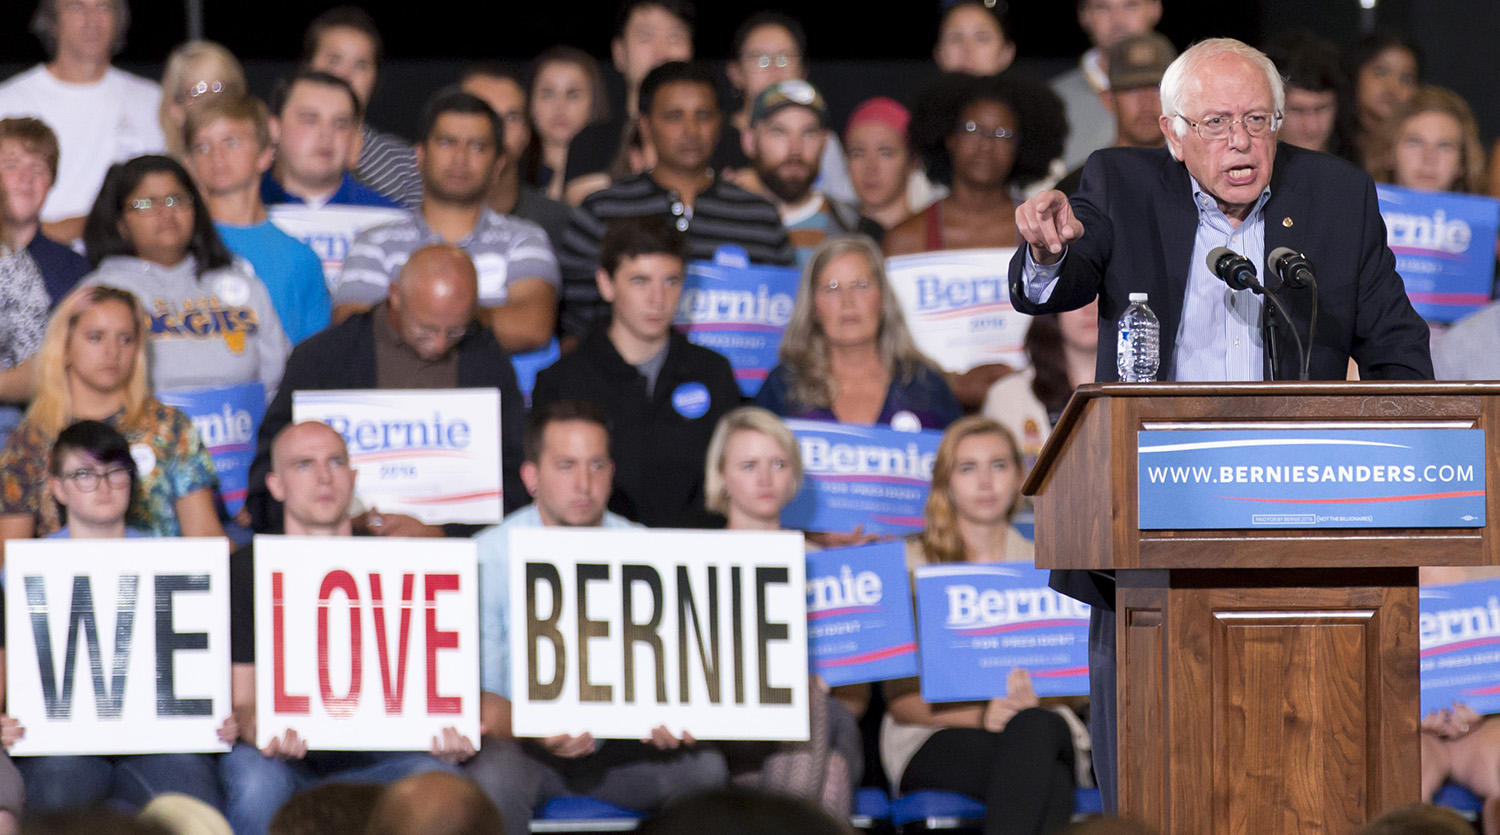 Democratic presidential candidate Sen. Bernie Sanders, I-Vt., speaks during a rally at the Greensboro Coliseum Special Events Center in Greensboro, N.C., Sunday, Sept. 13, 2015. (AP Photo/Rob Brown)